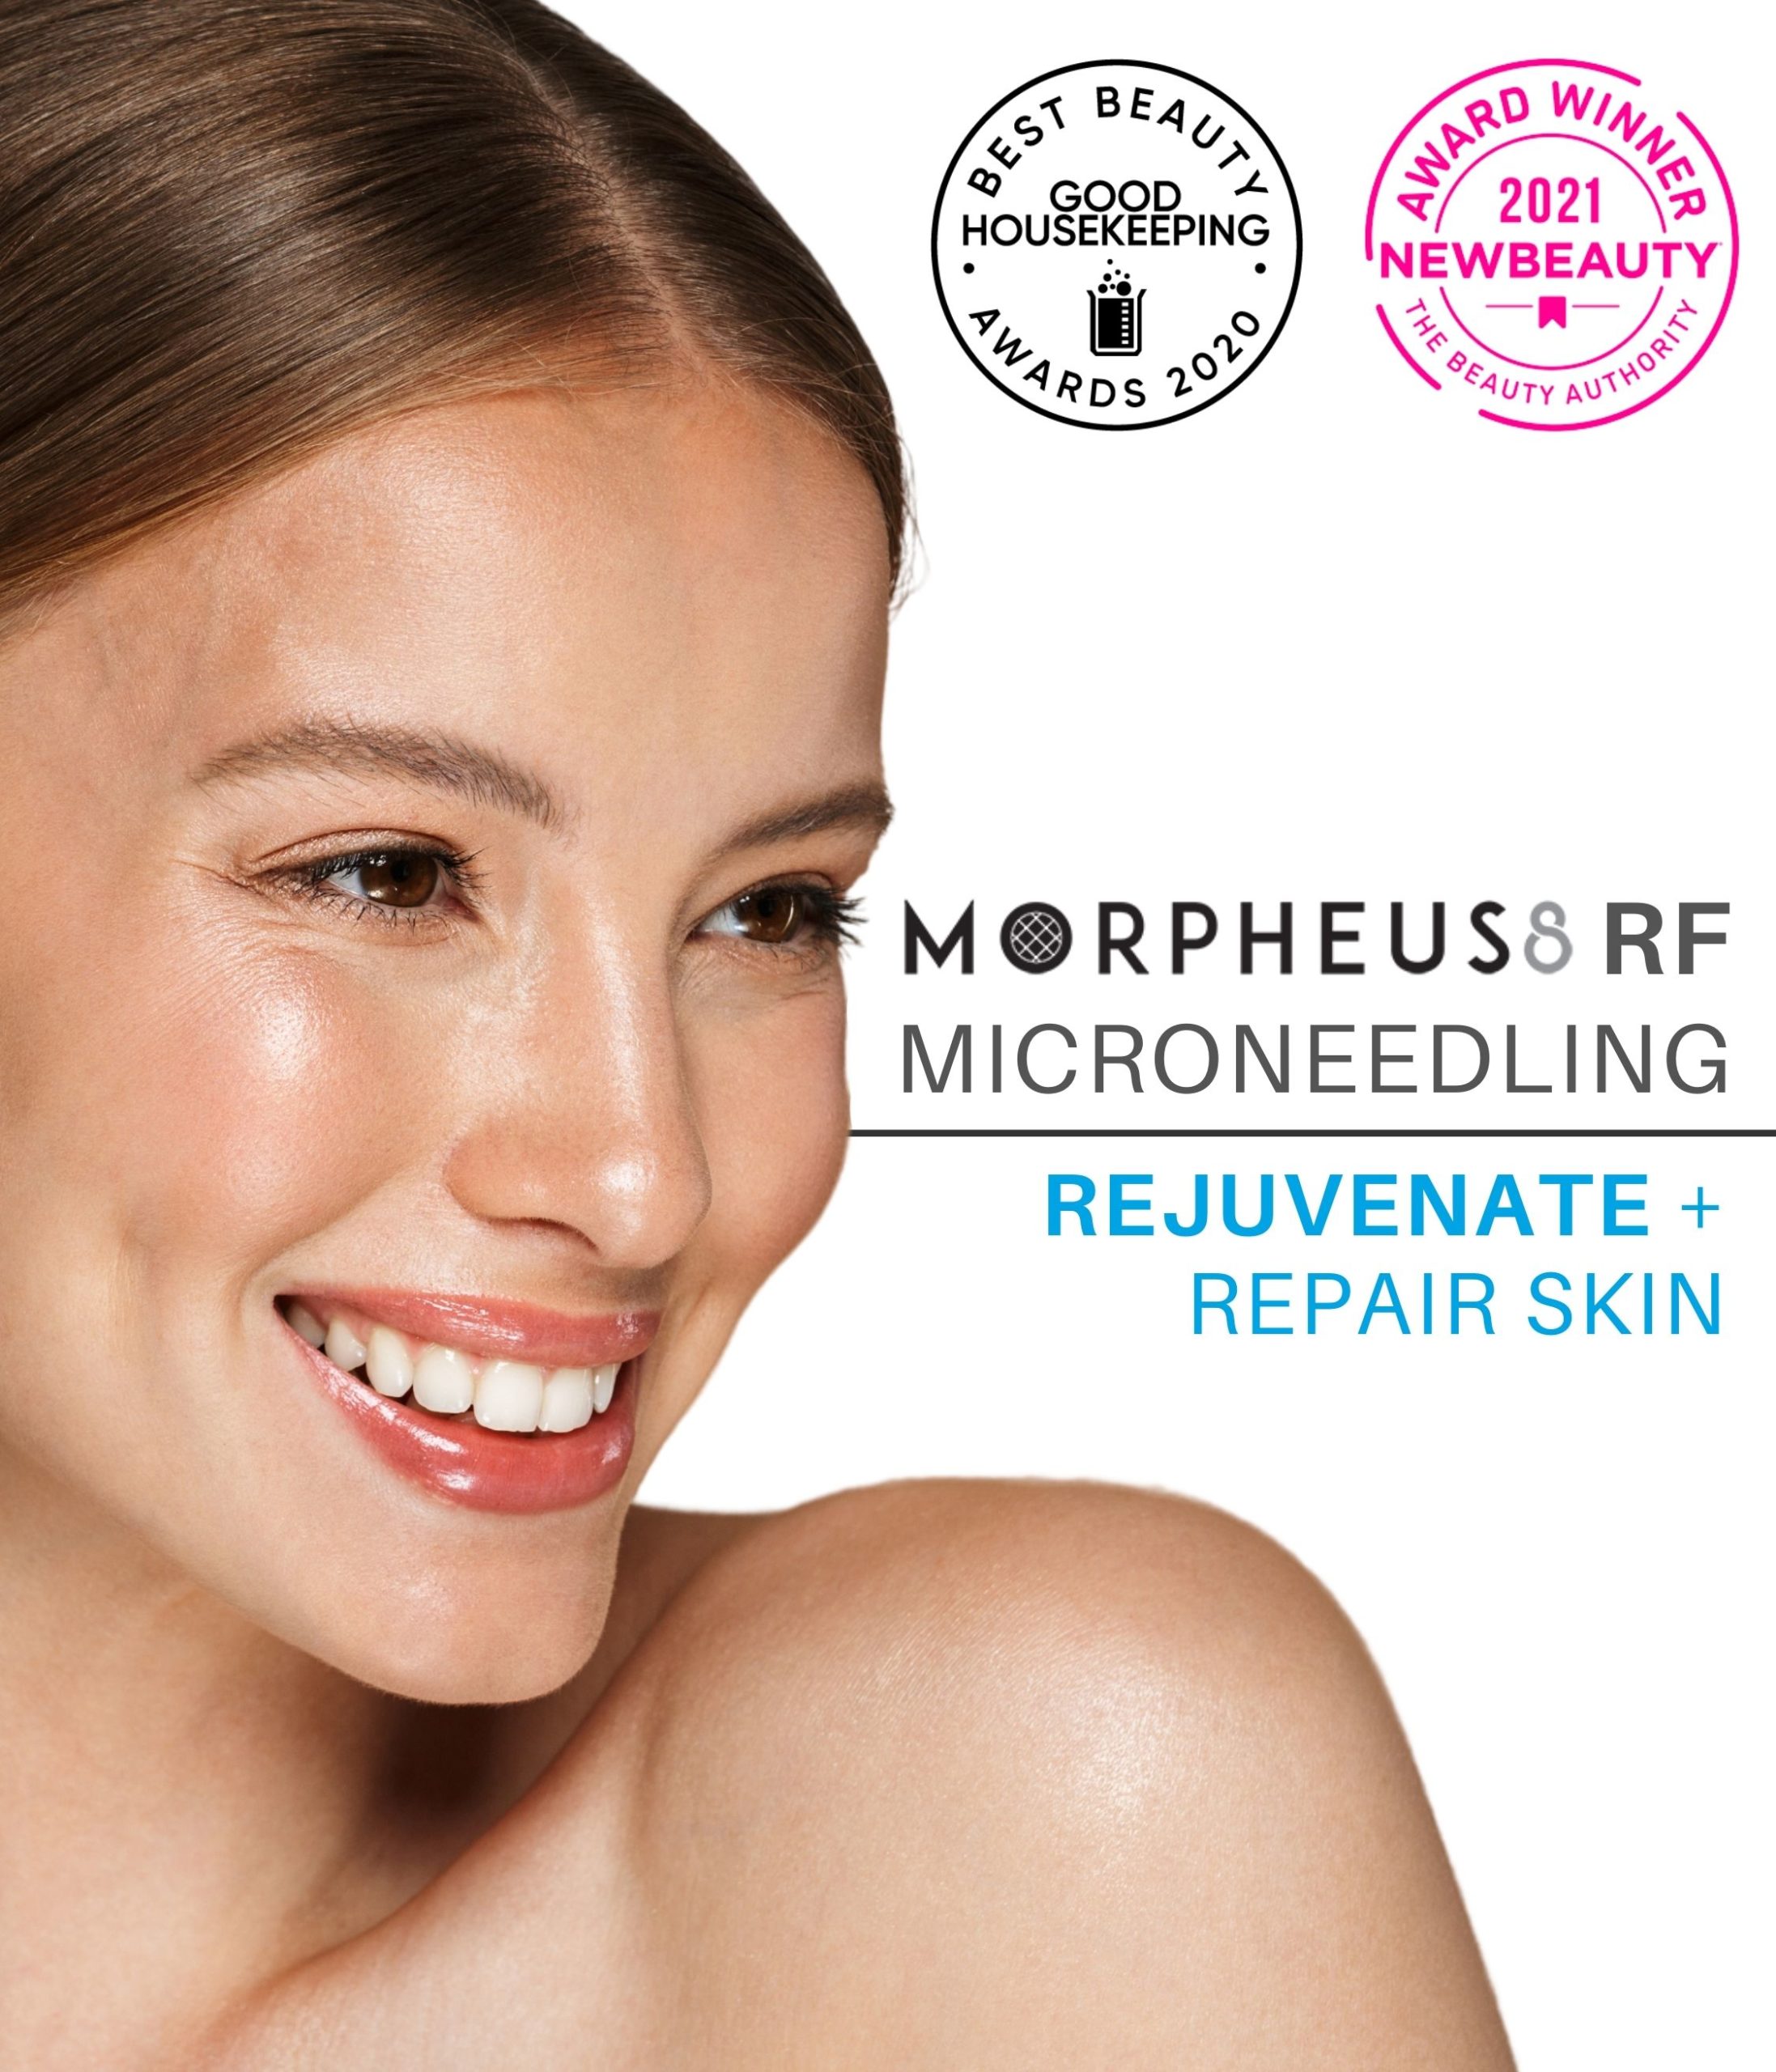 woman with a clear face promoting RF Microneedling with Morpheus8 treatment